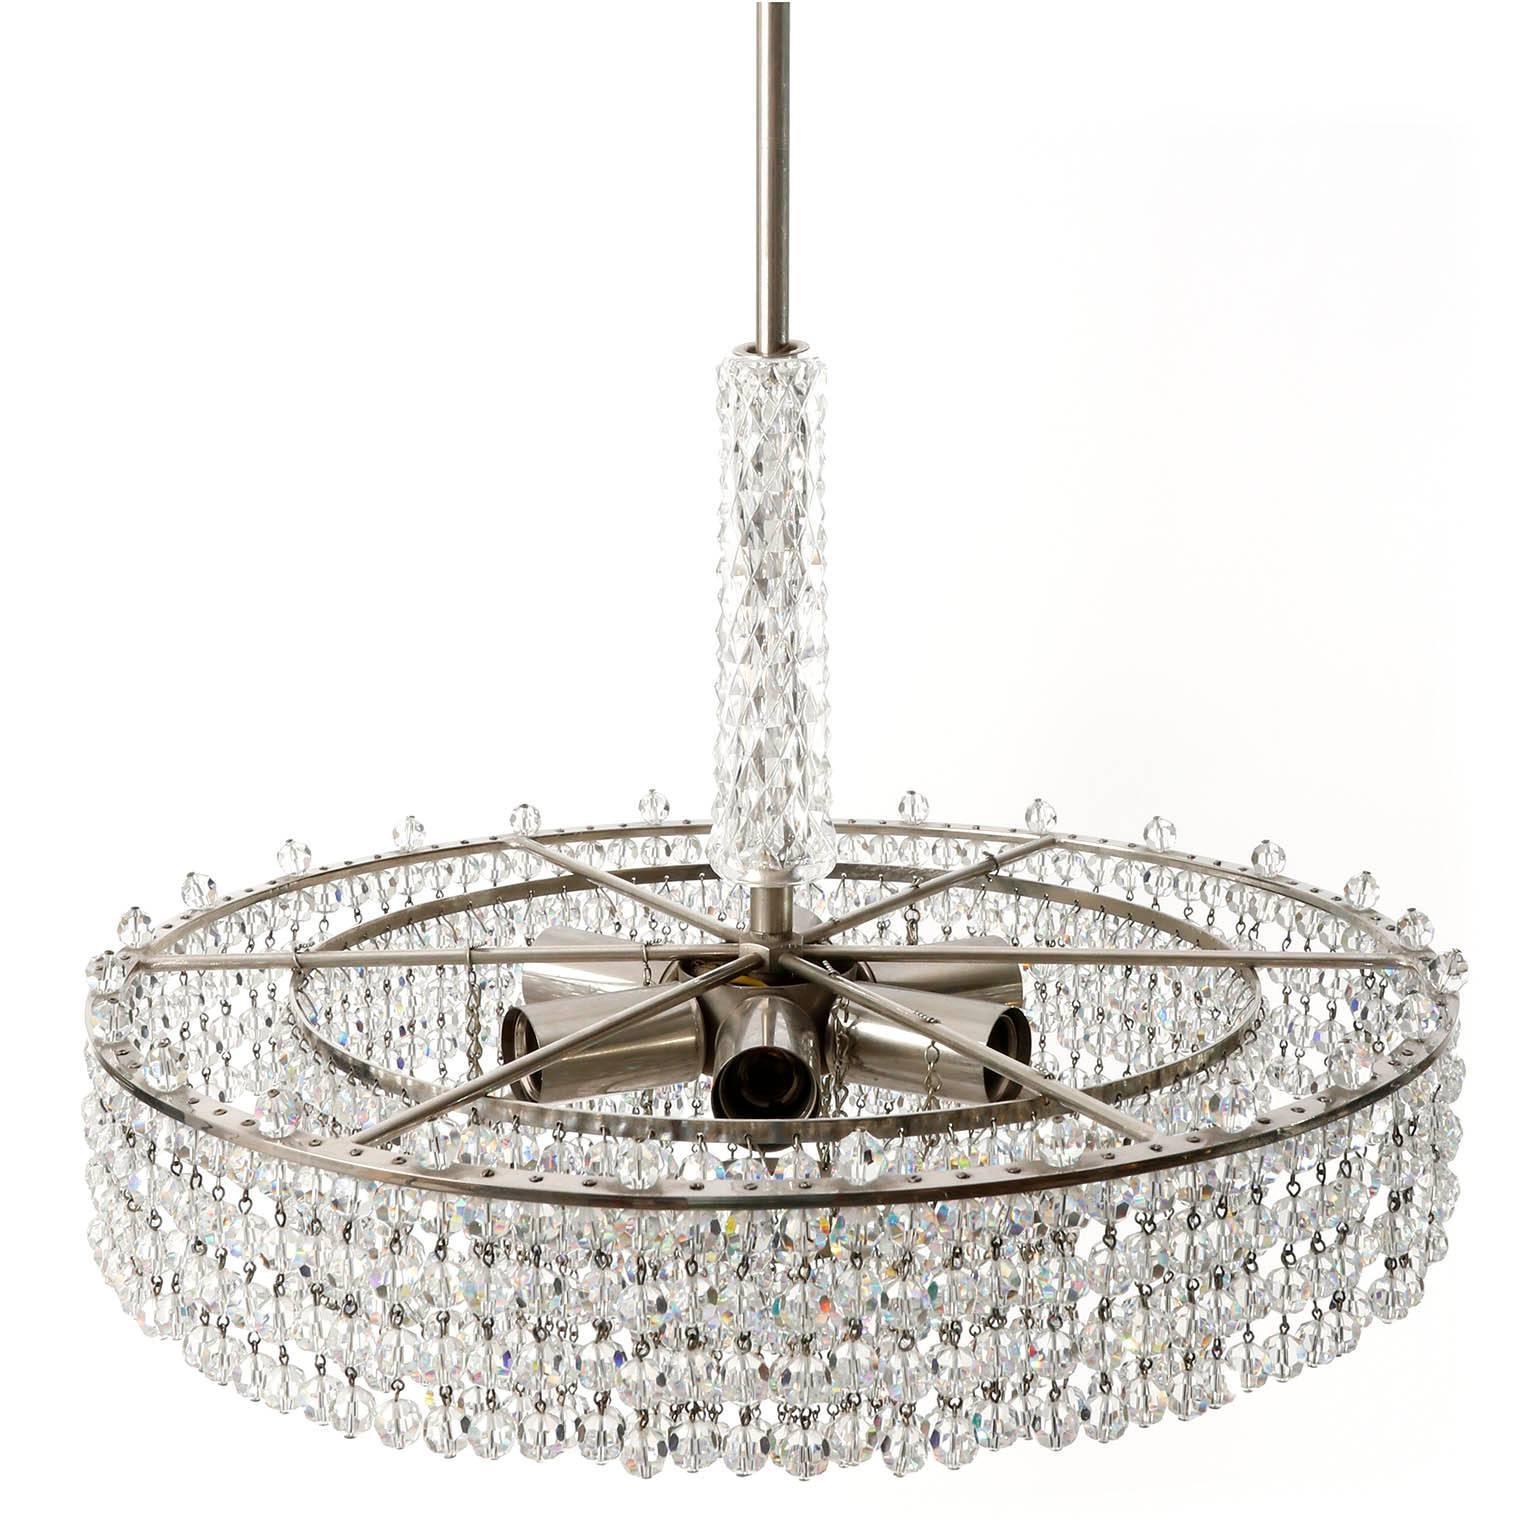 Mid-20th Century Palwa Chandelier, Nickel Cut Crystal Glass, Germany, 1960s For Sale